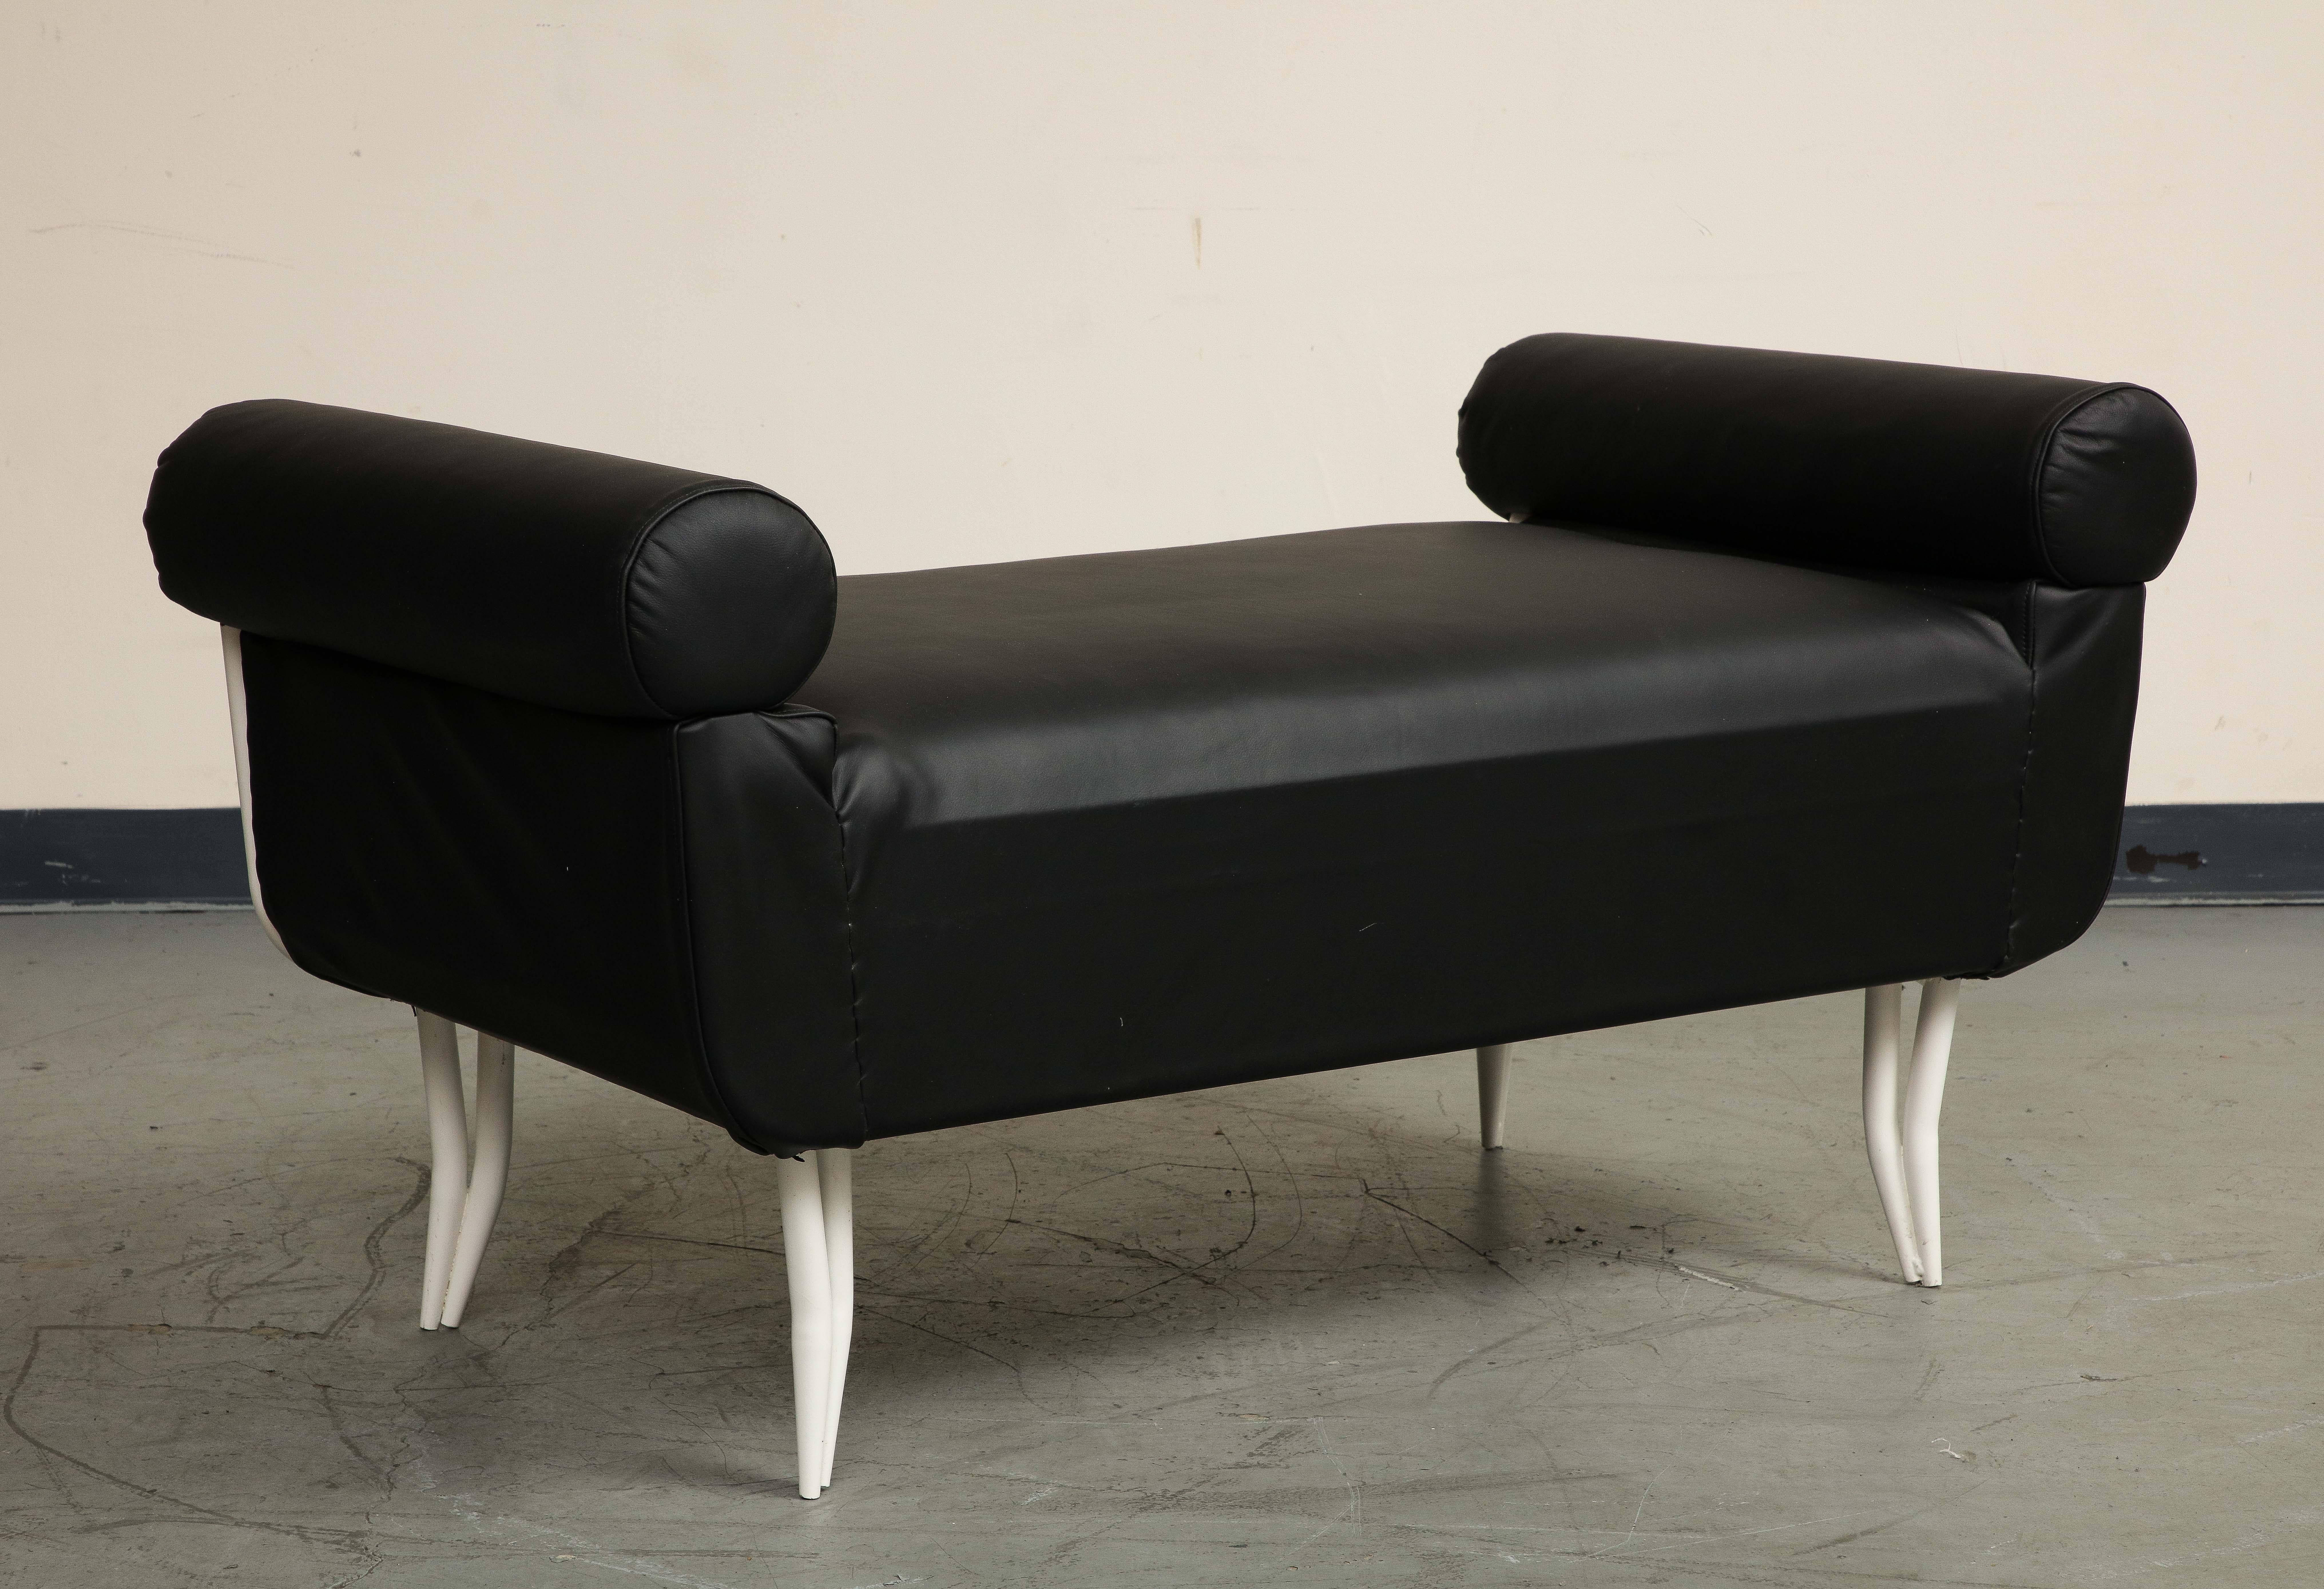 French 1960s Rene Prou Style White Painted Iron & Black Leather Daybed or Bench For Sale 3